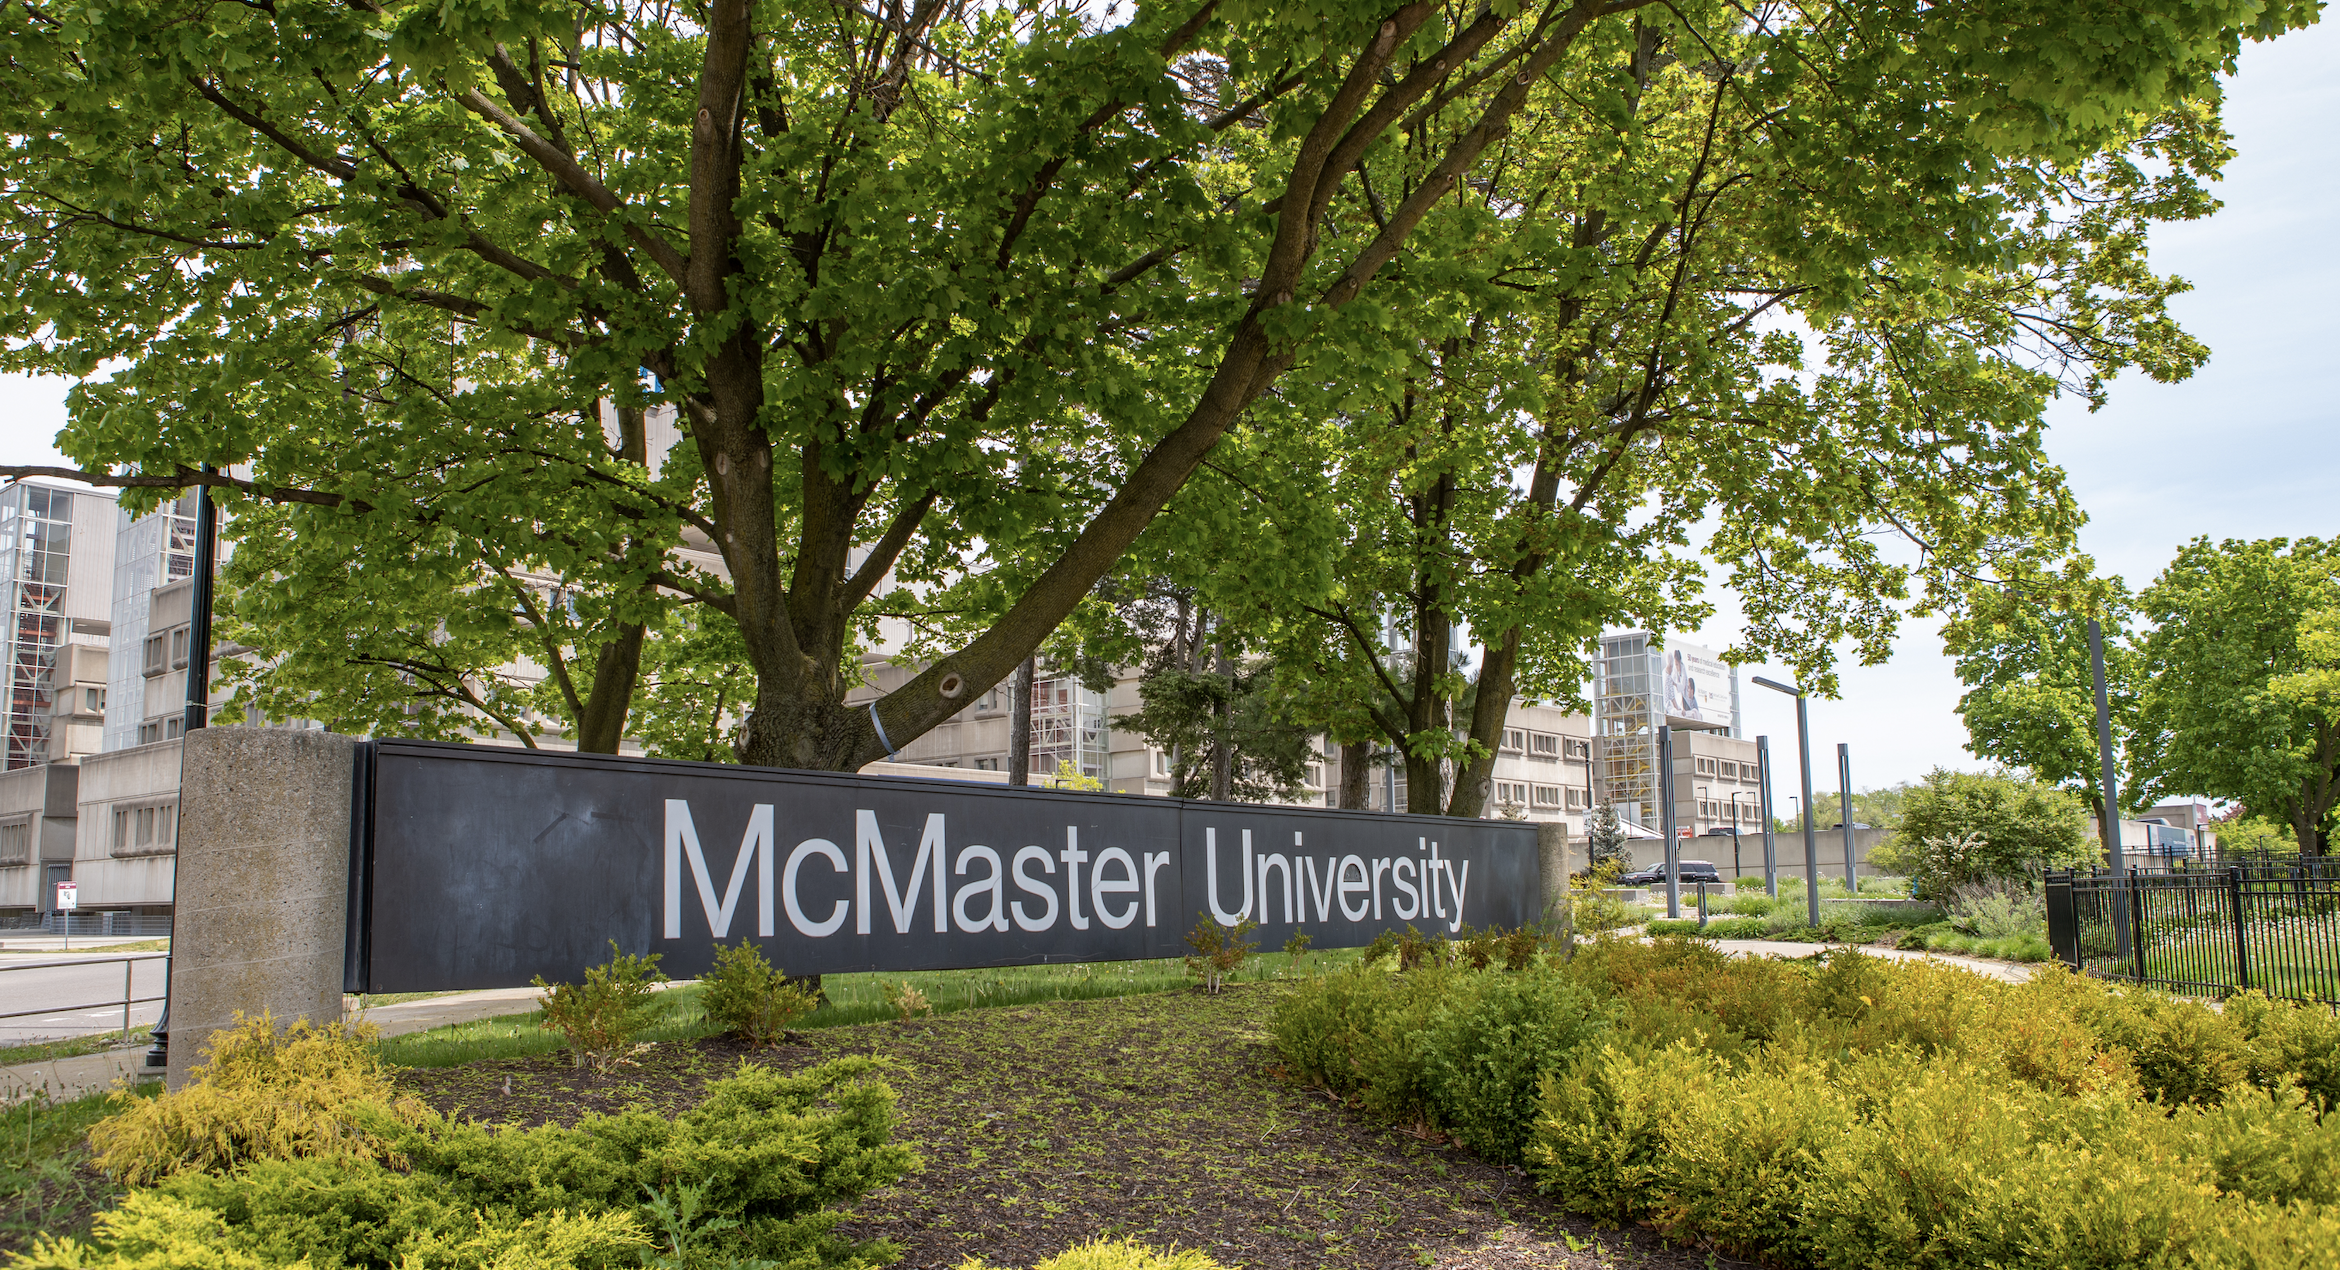 Photo of McMaster Signage in front of trees and shrubs